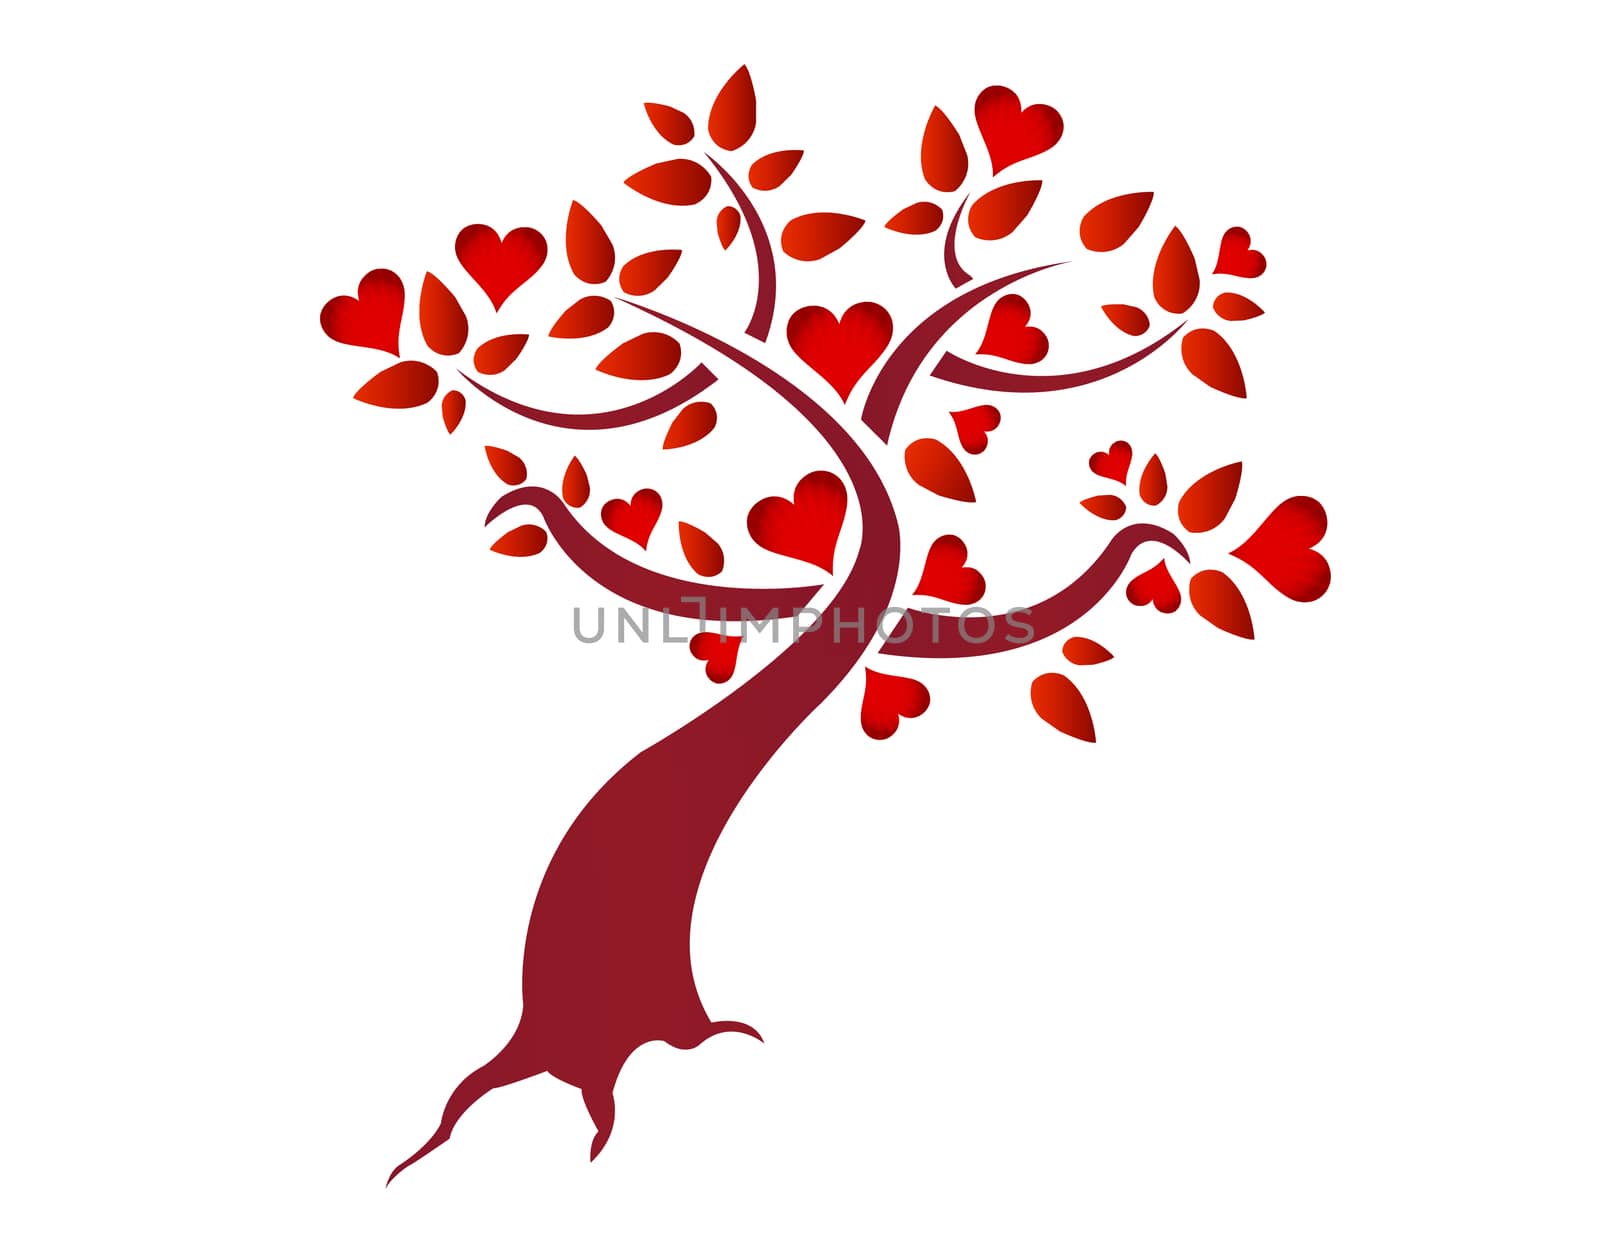 Heart tree illustration design isolated over a white background